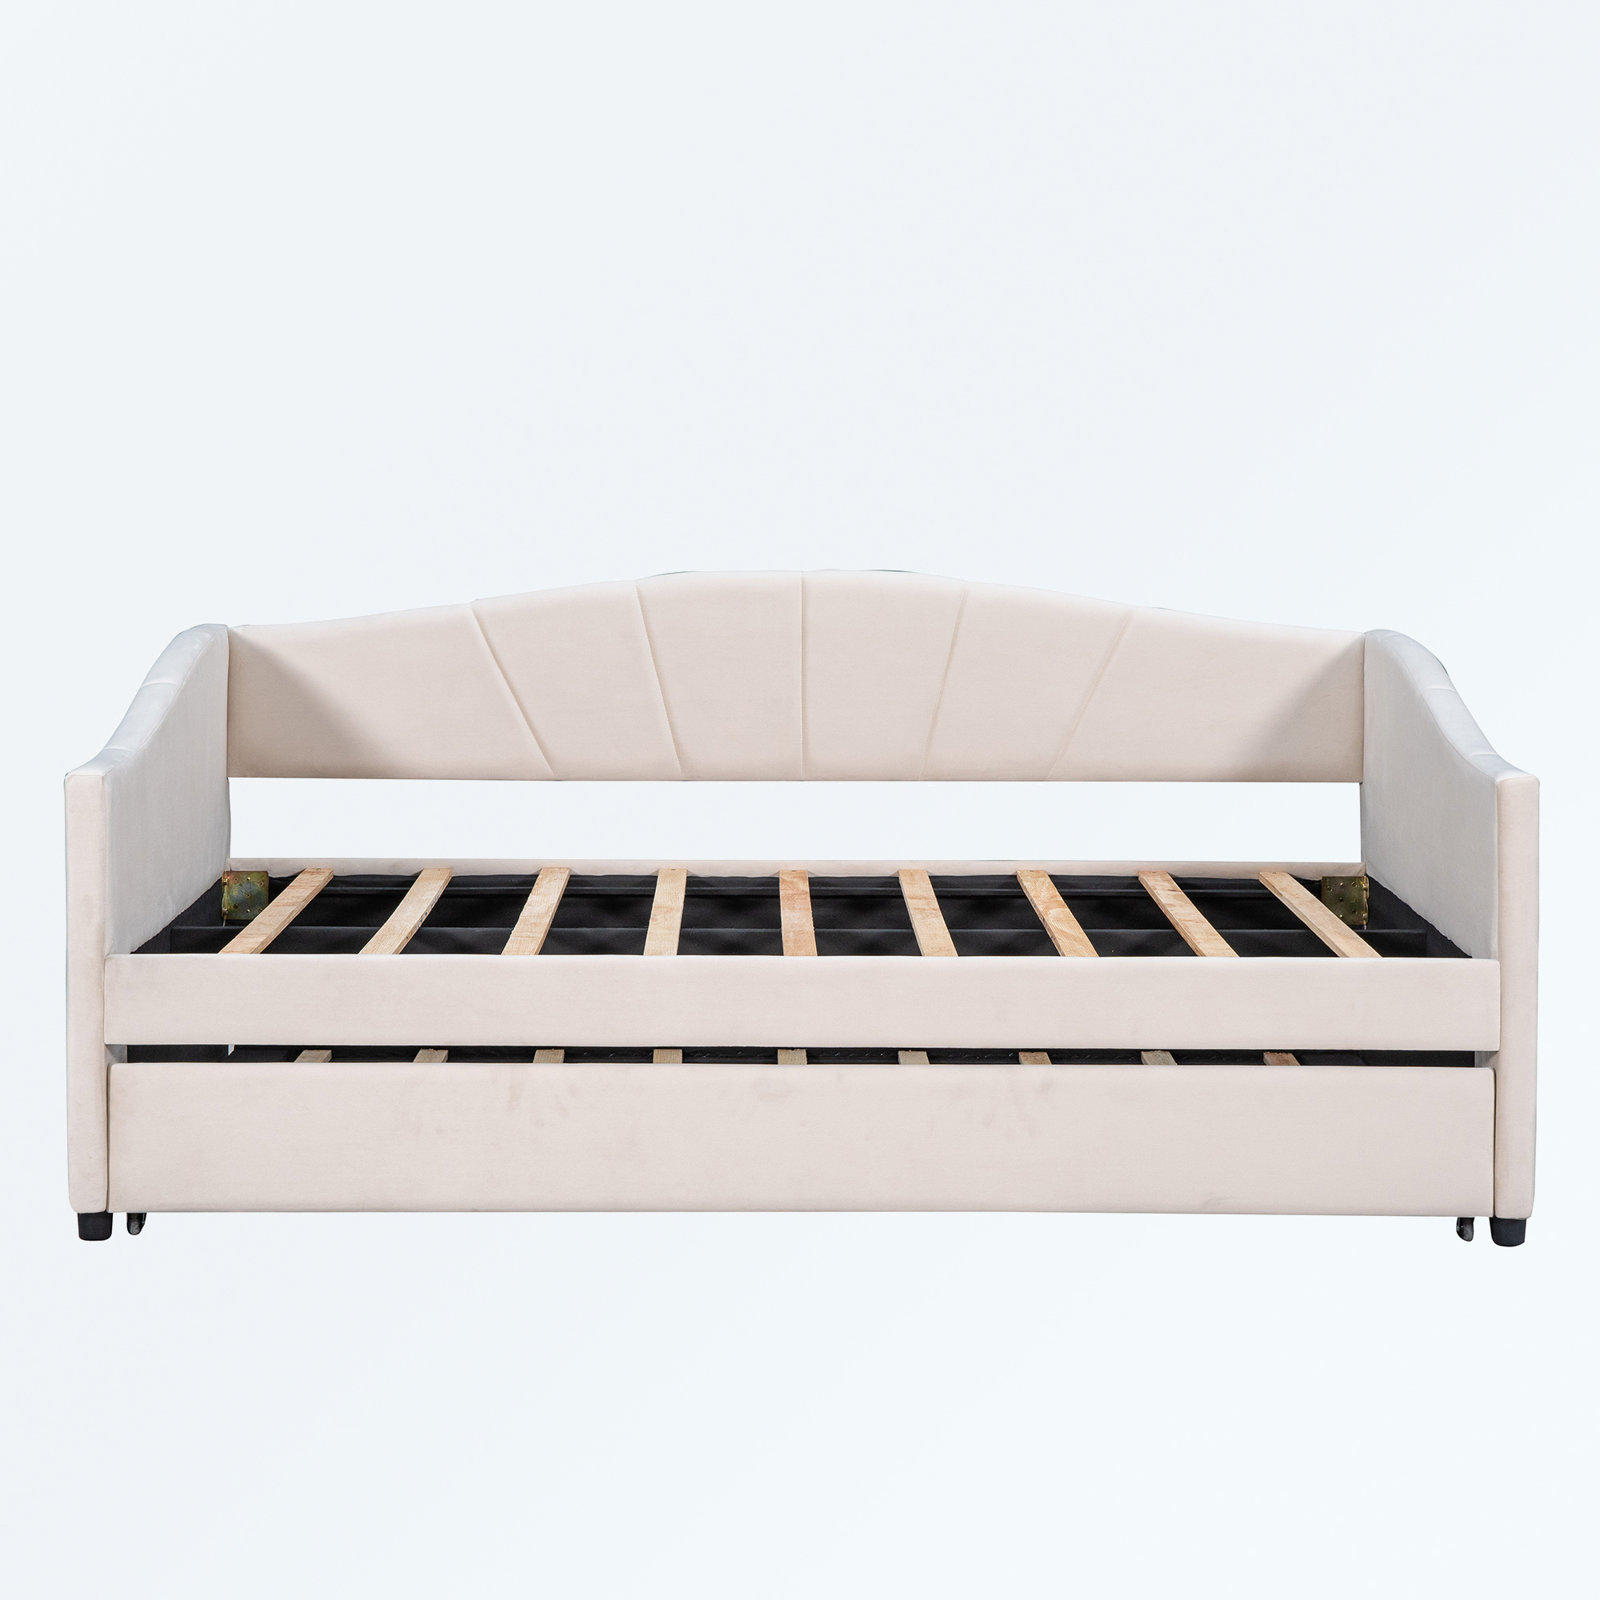 Everly Quinn Propus Upholstered Daybed with Trundle